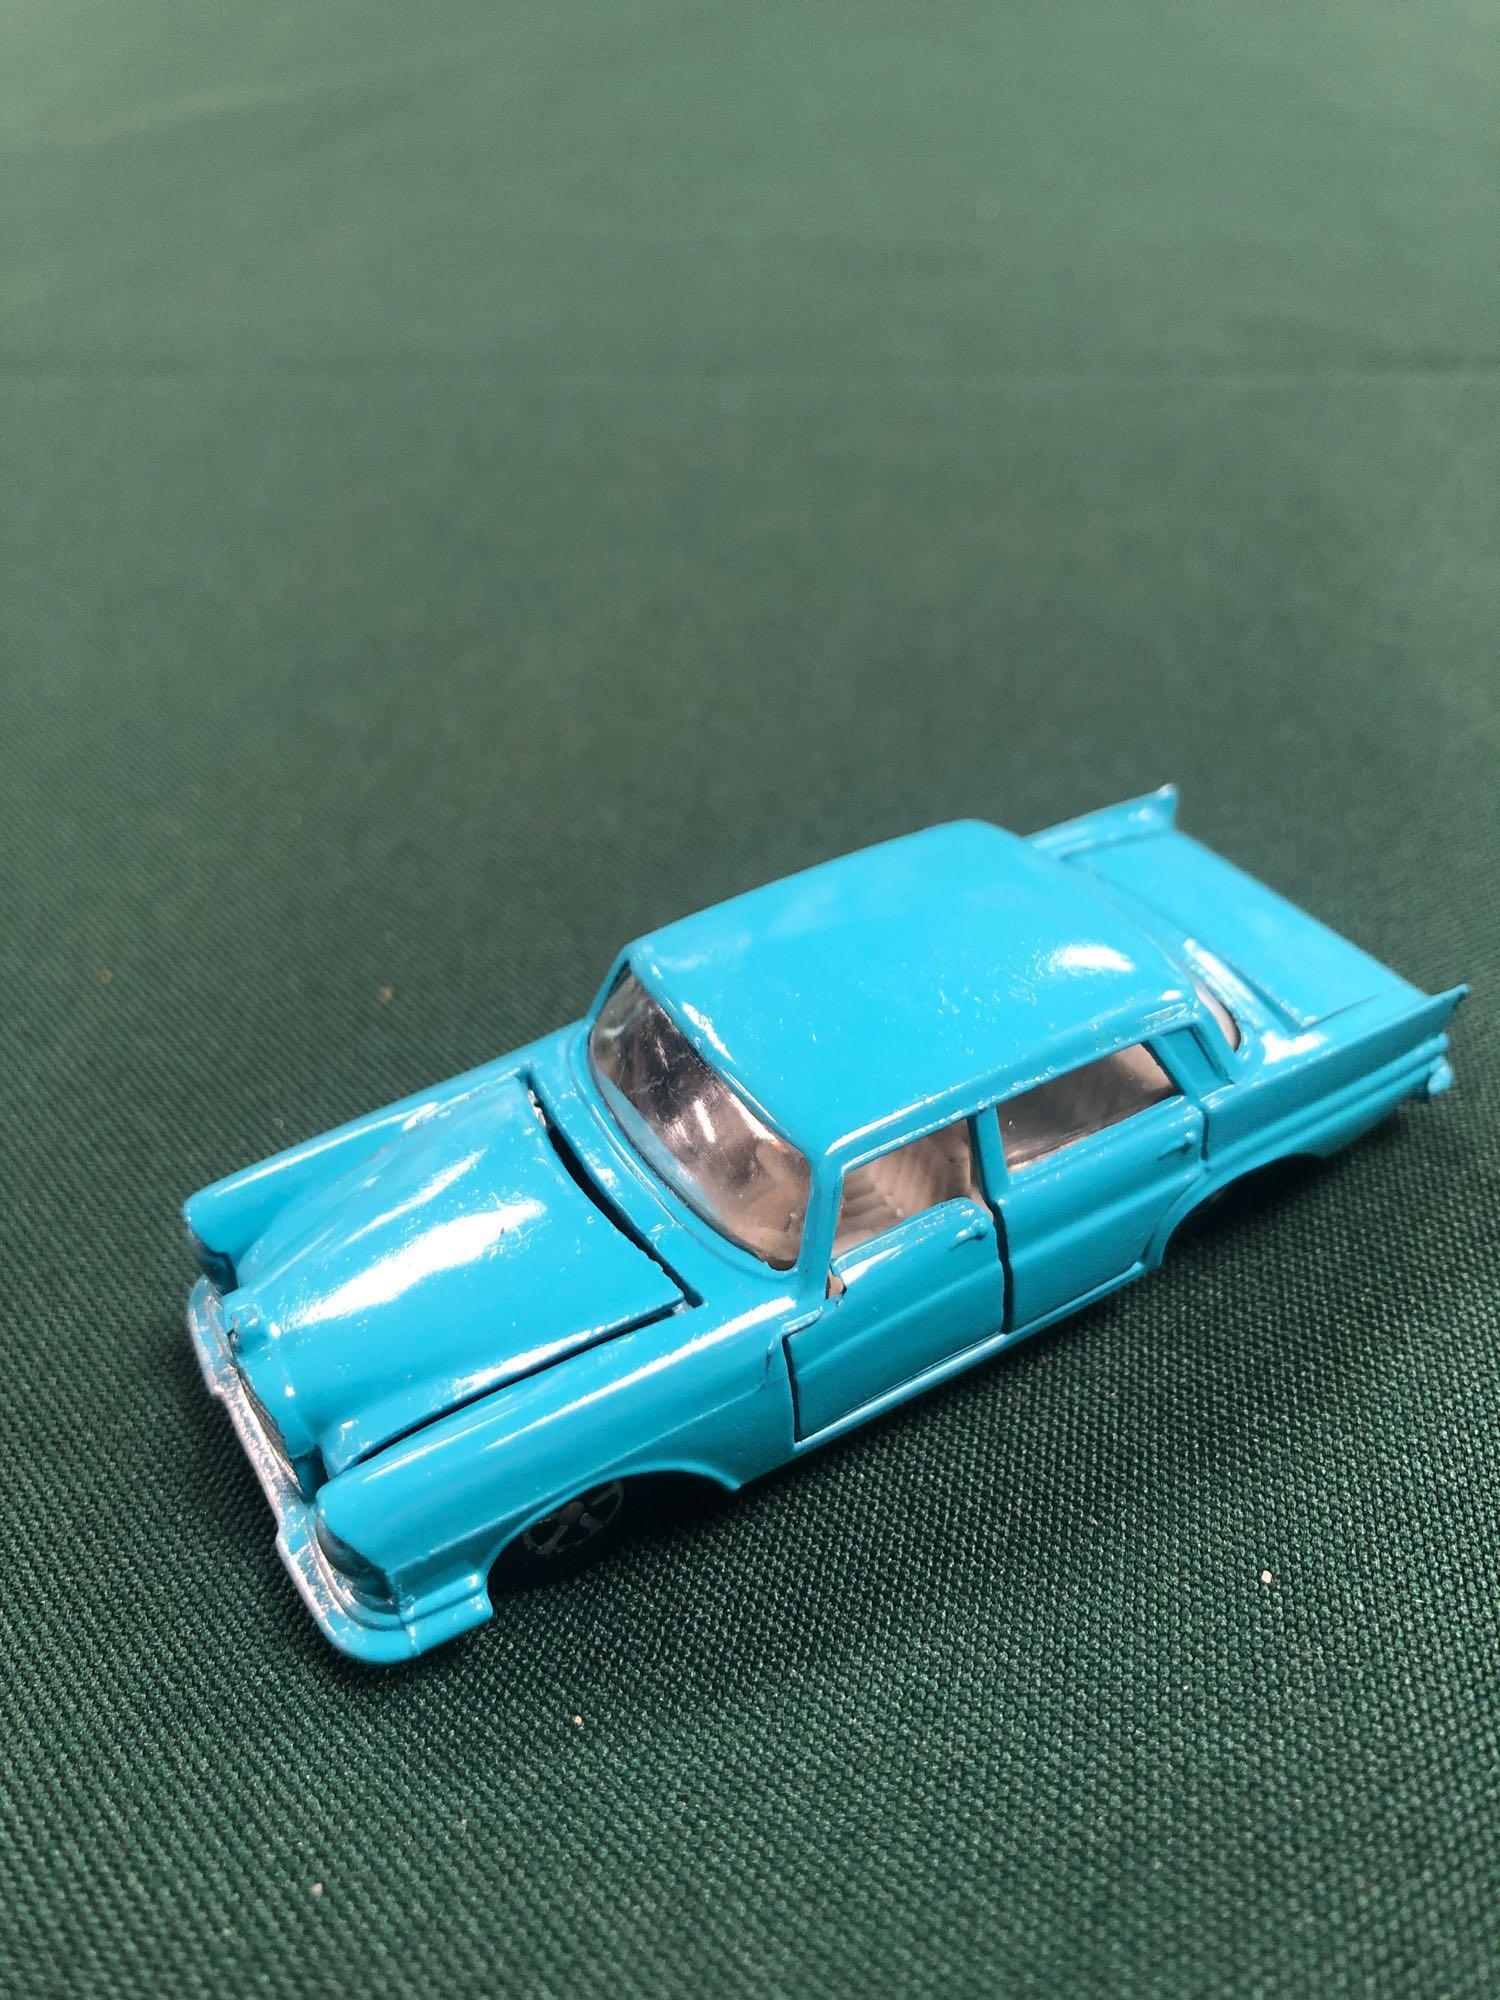 Lone Star Flyers Diecast Model #17 Mercedes-Benz 220SE In Blue With A White Interior In Box - Image 2 of 3